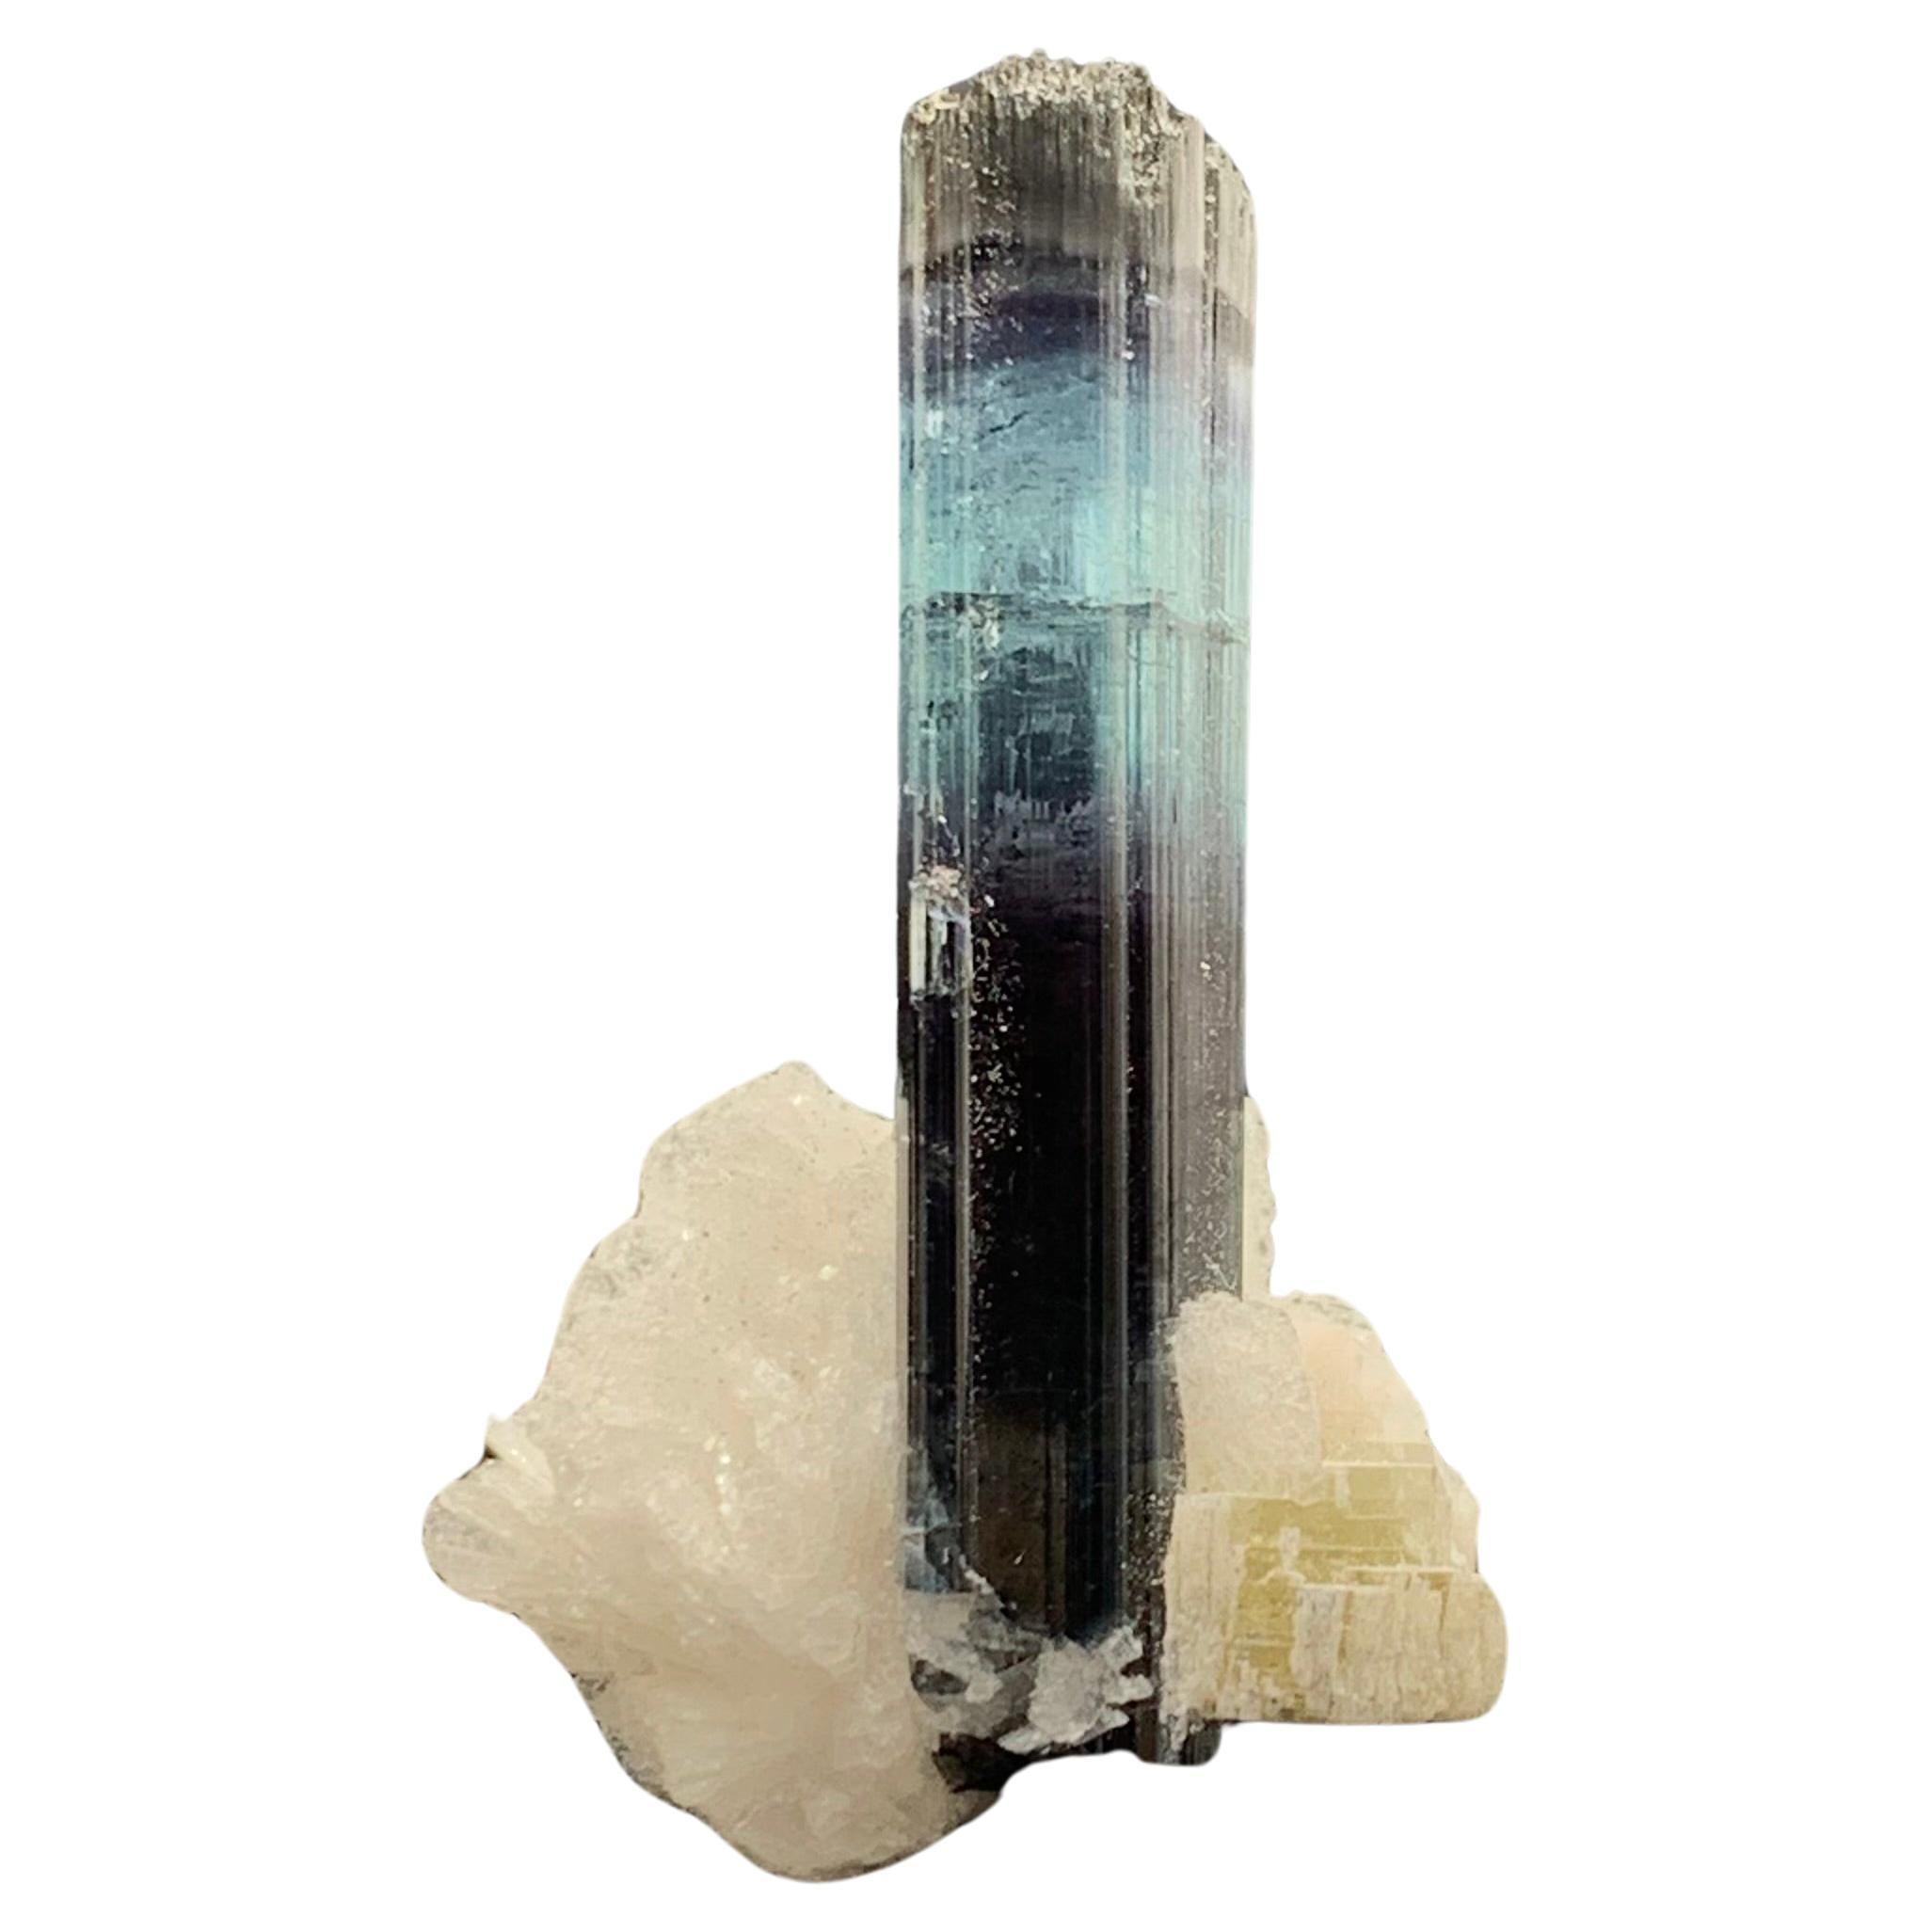 16.00 Carat Glamorous Bi Color Tourmaline With Albite From Kunar, Afghanistan 